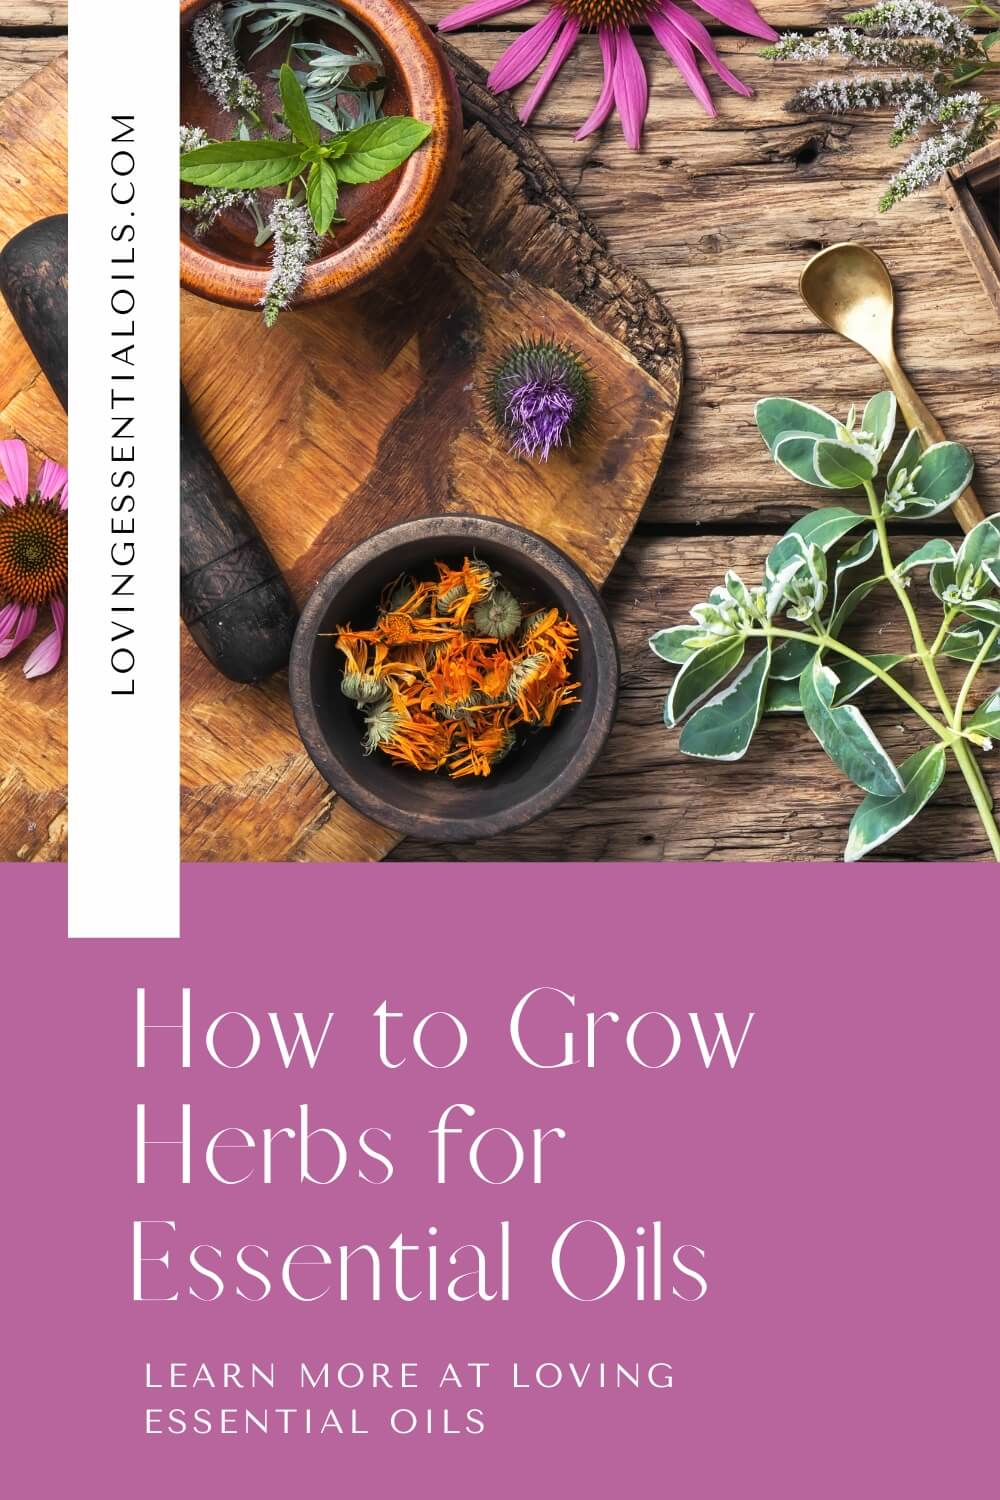 How to Grow Herbs for Essential Oils by Loving Essential Oils